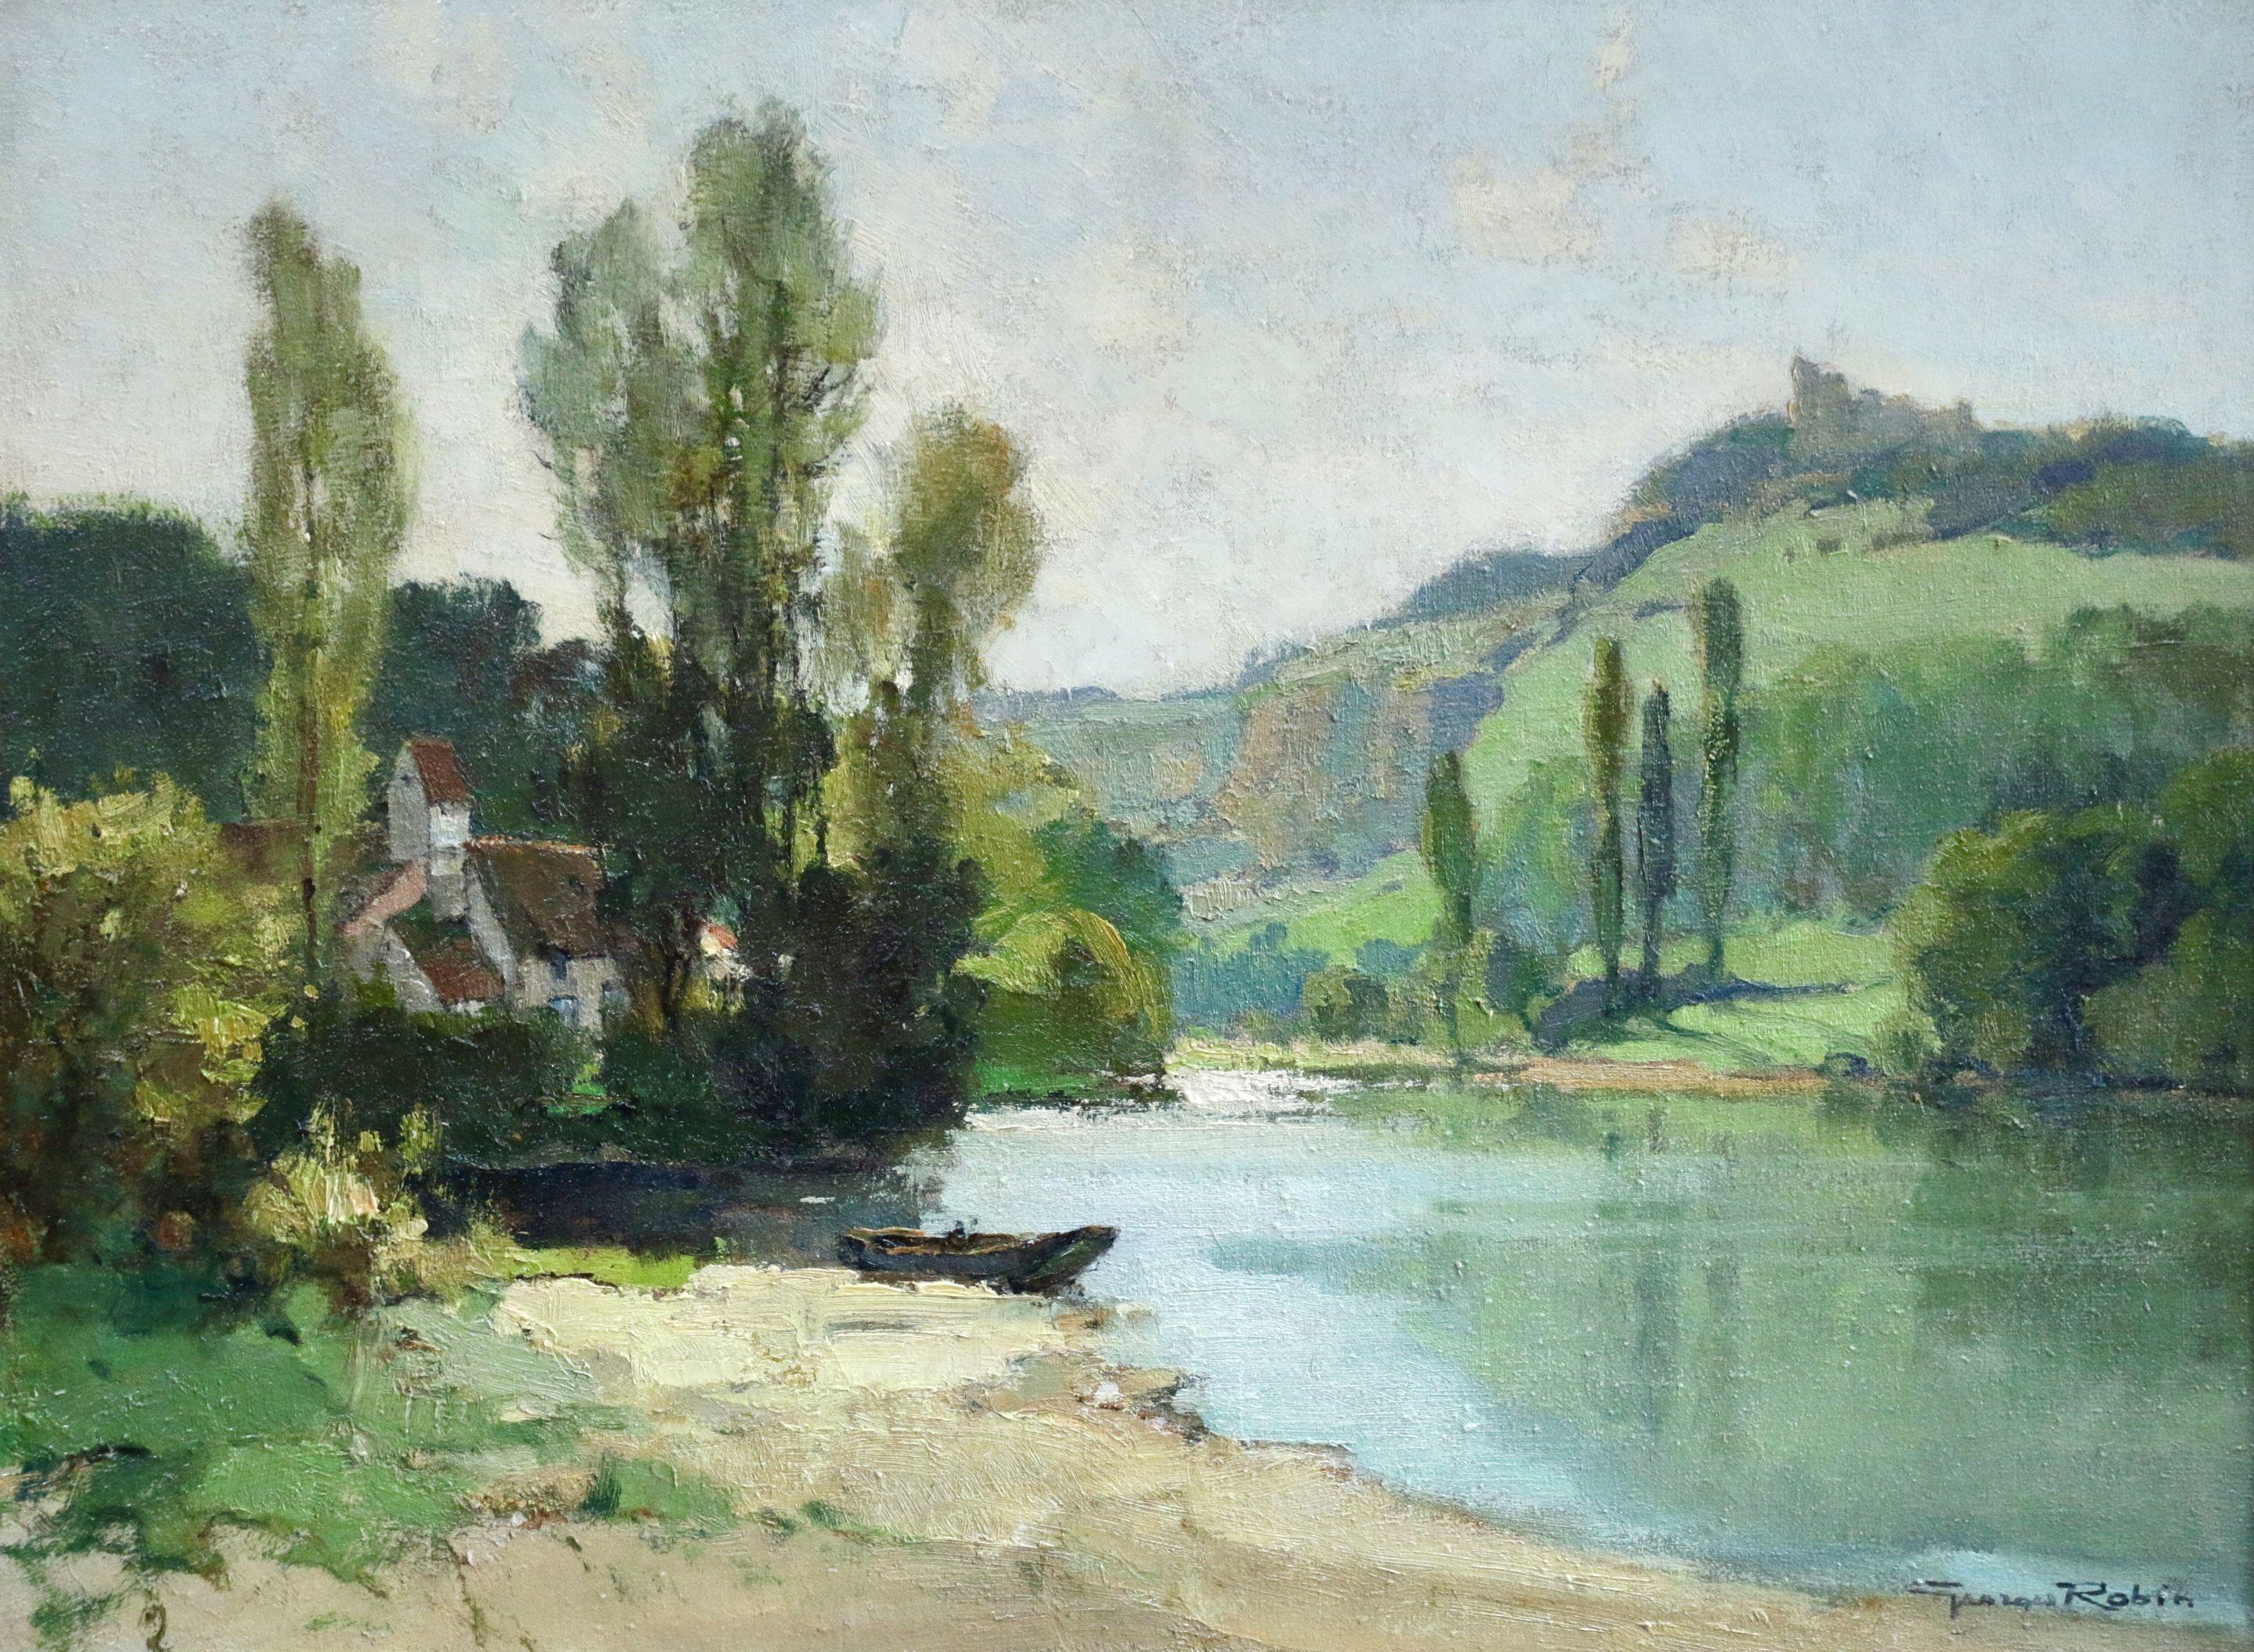 Georges Charles Robin Landscape Painting - La Dordoge a Taillefer - 20th Century, Cottage in Riverscape Landscape by Robin 